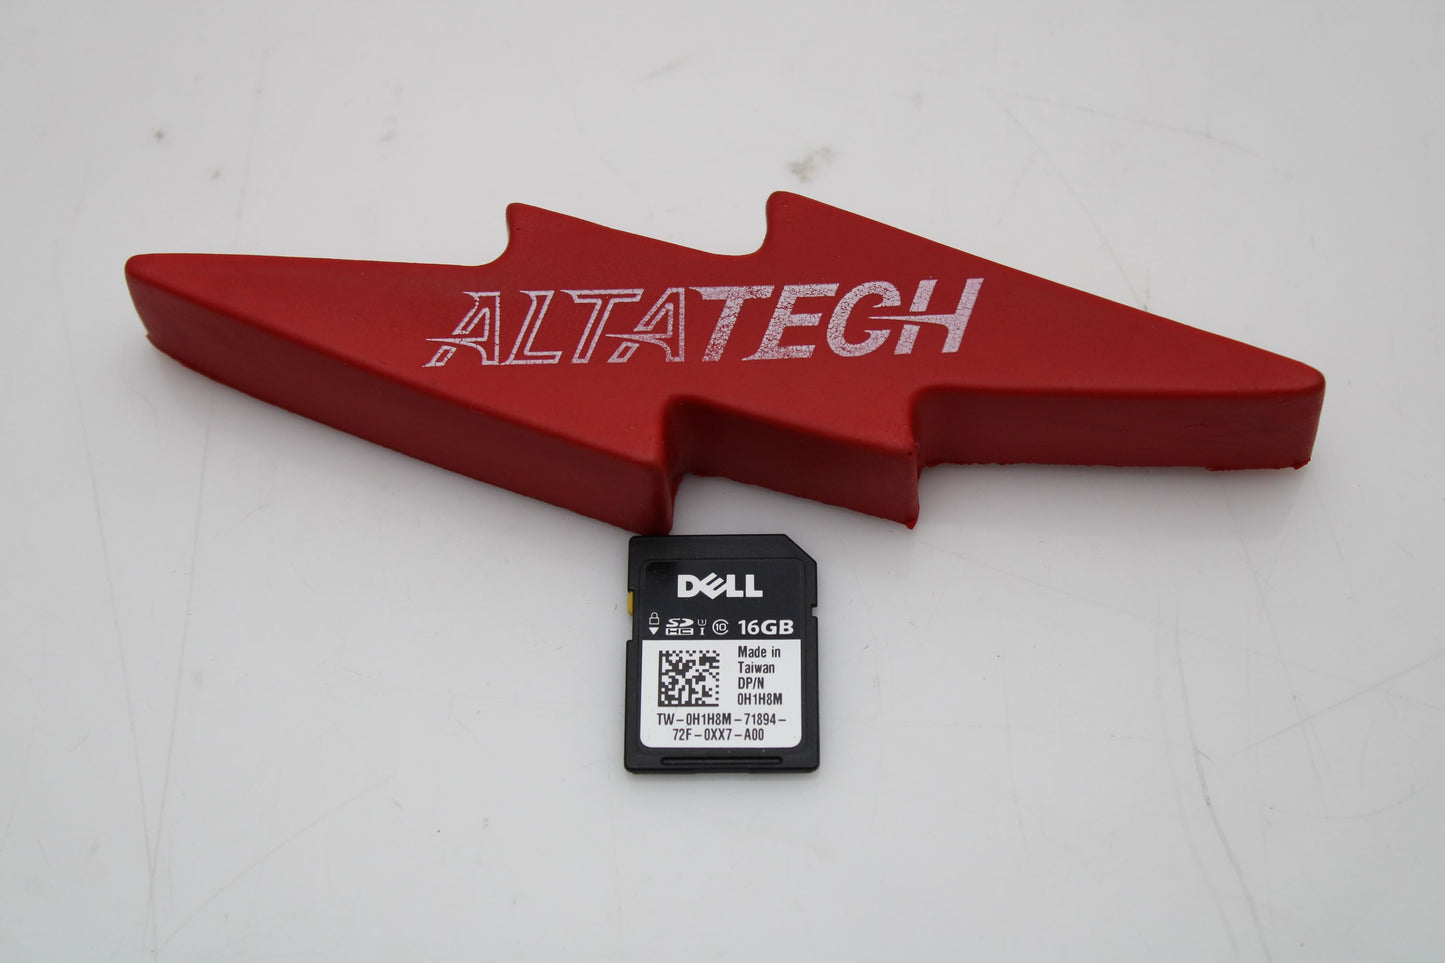 Dell 037D9D 16GB SD Card G13 ISDN HC R730, Used